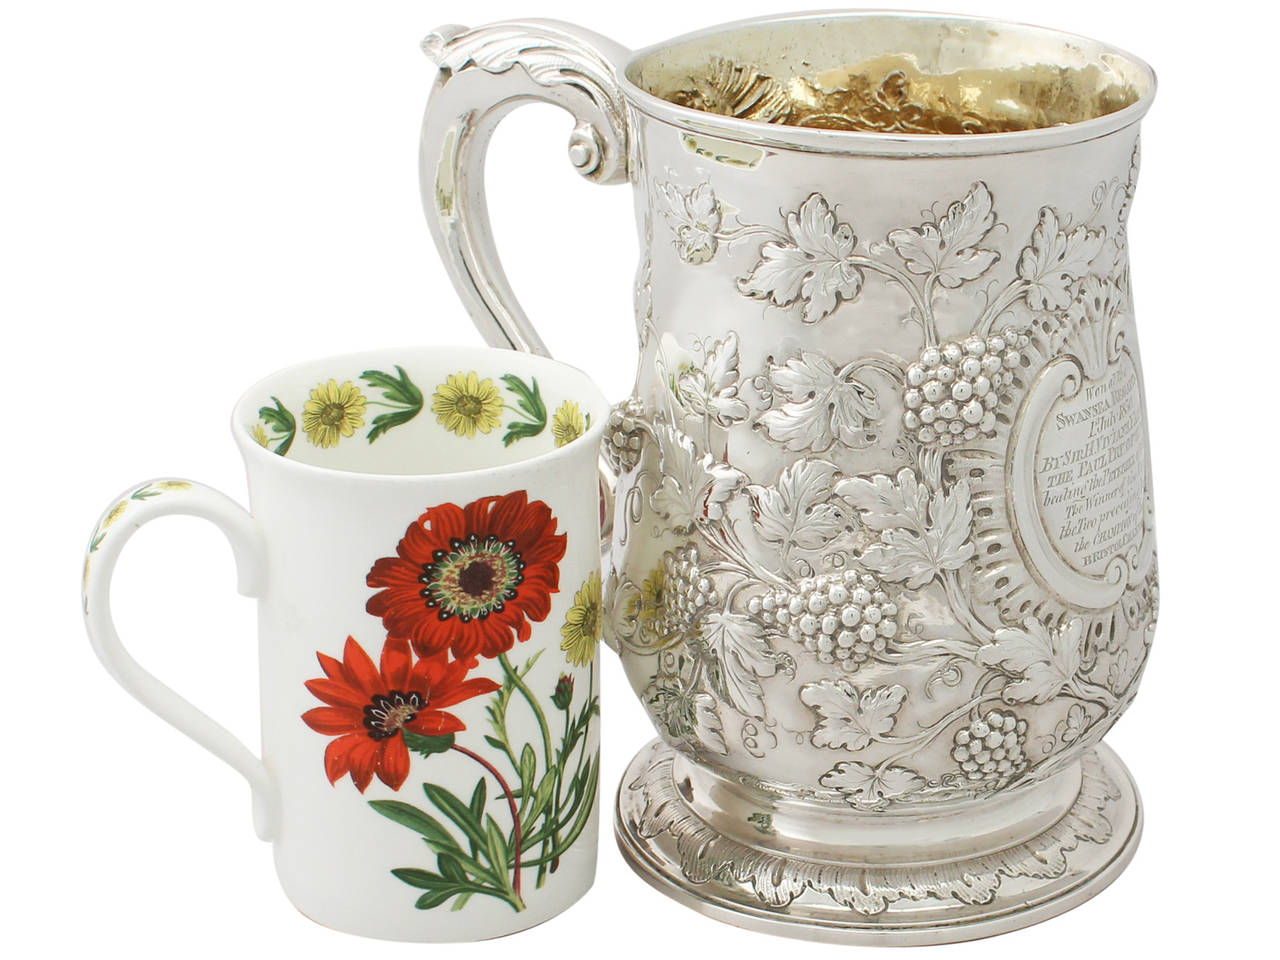 An exceptional, fine and impressive, large antique Georgian English sterling silver quart mug; an addition to our range of wine and drinks related silverware collection

This exceptional antique George III sterling silver mug has a baluster shaped